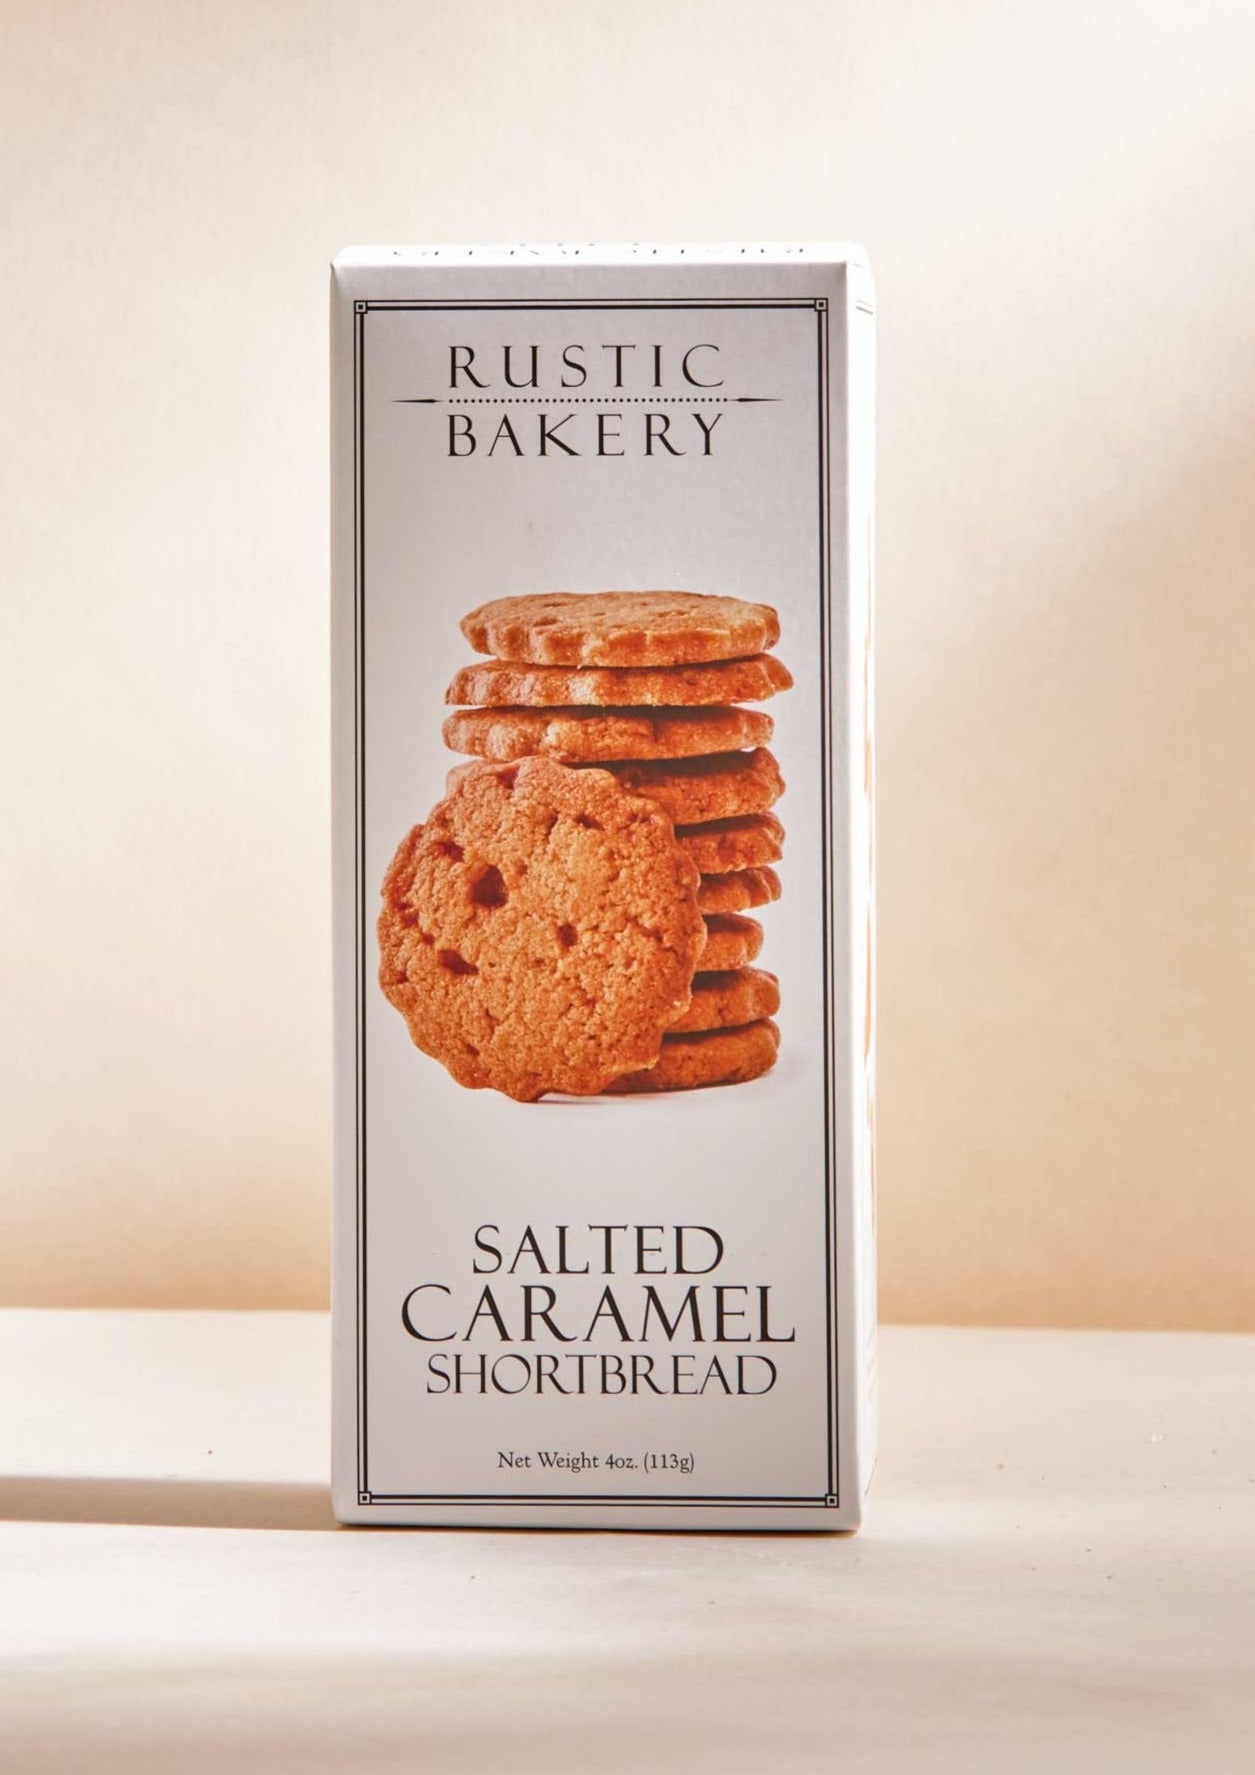 Salted Caramel Shortbread (12 Boxes) Rustic Bakery